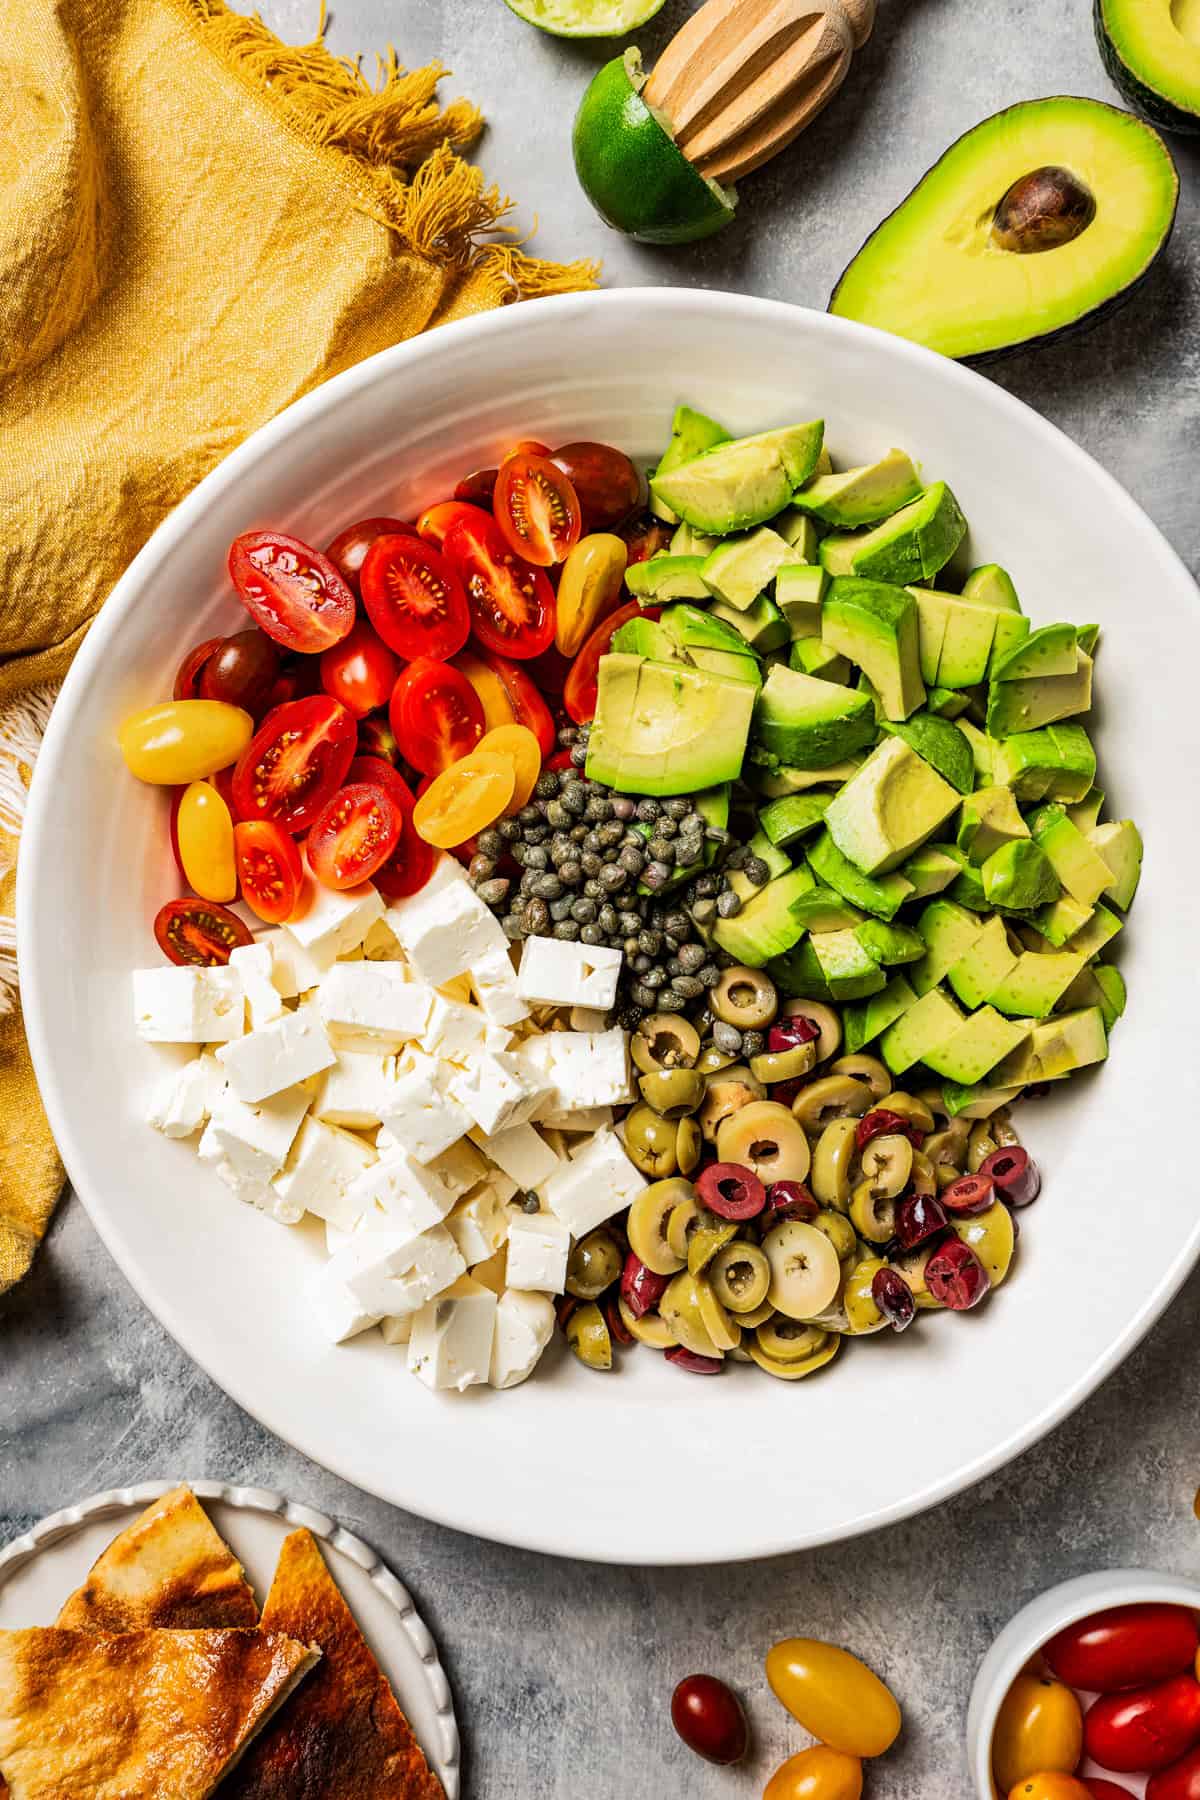 Halved grape tomatoes, cubes of feta cheese, diced avocado, and sliced olives, all arranged in a large salad bowl.